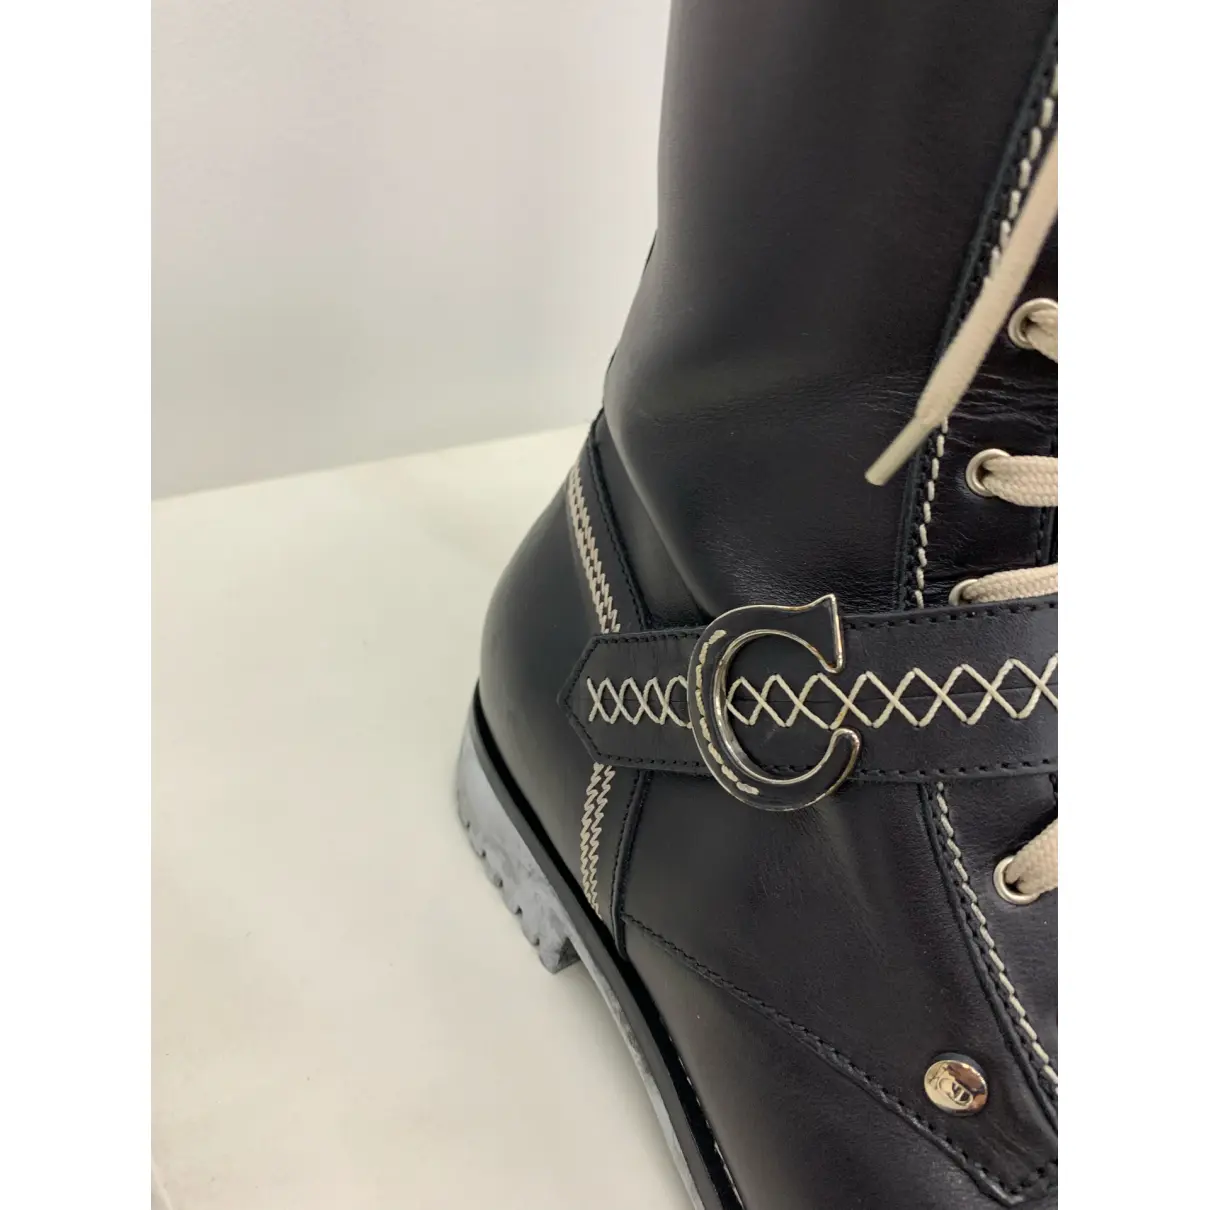 Leather riding boots Dior